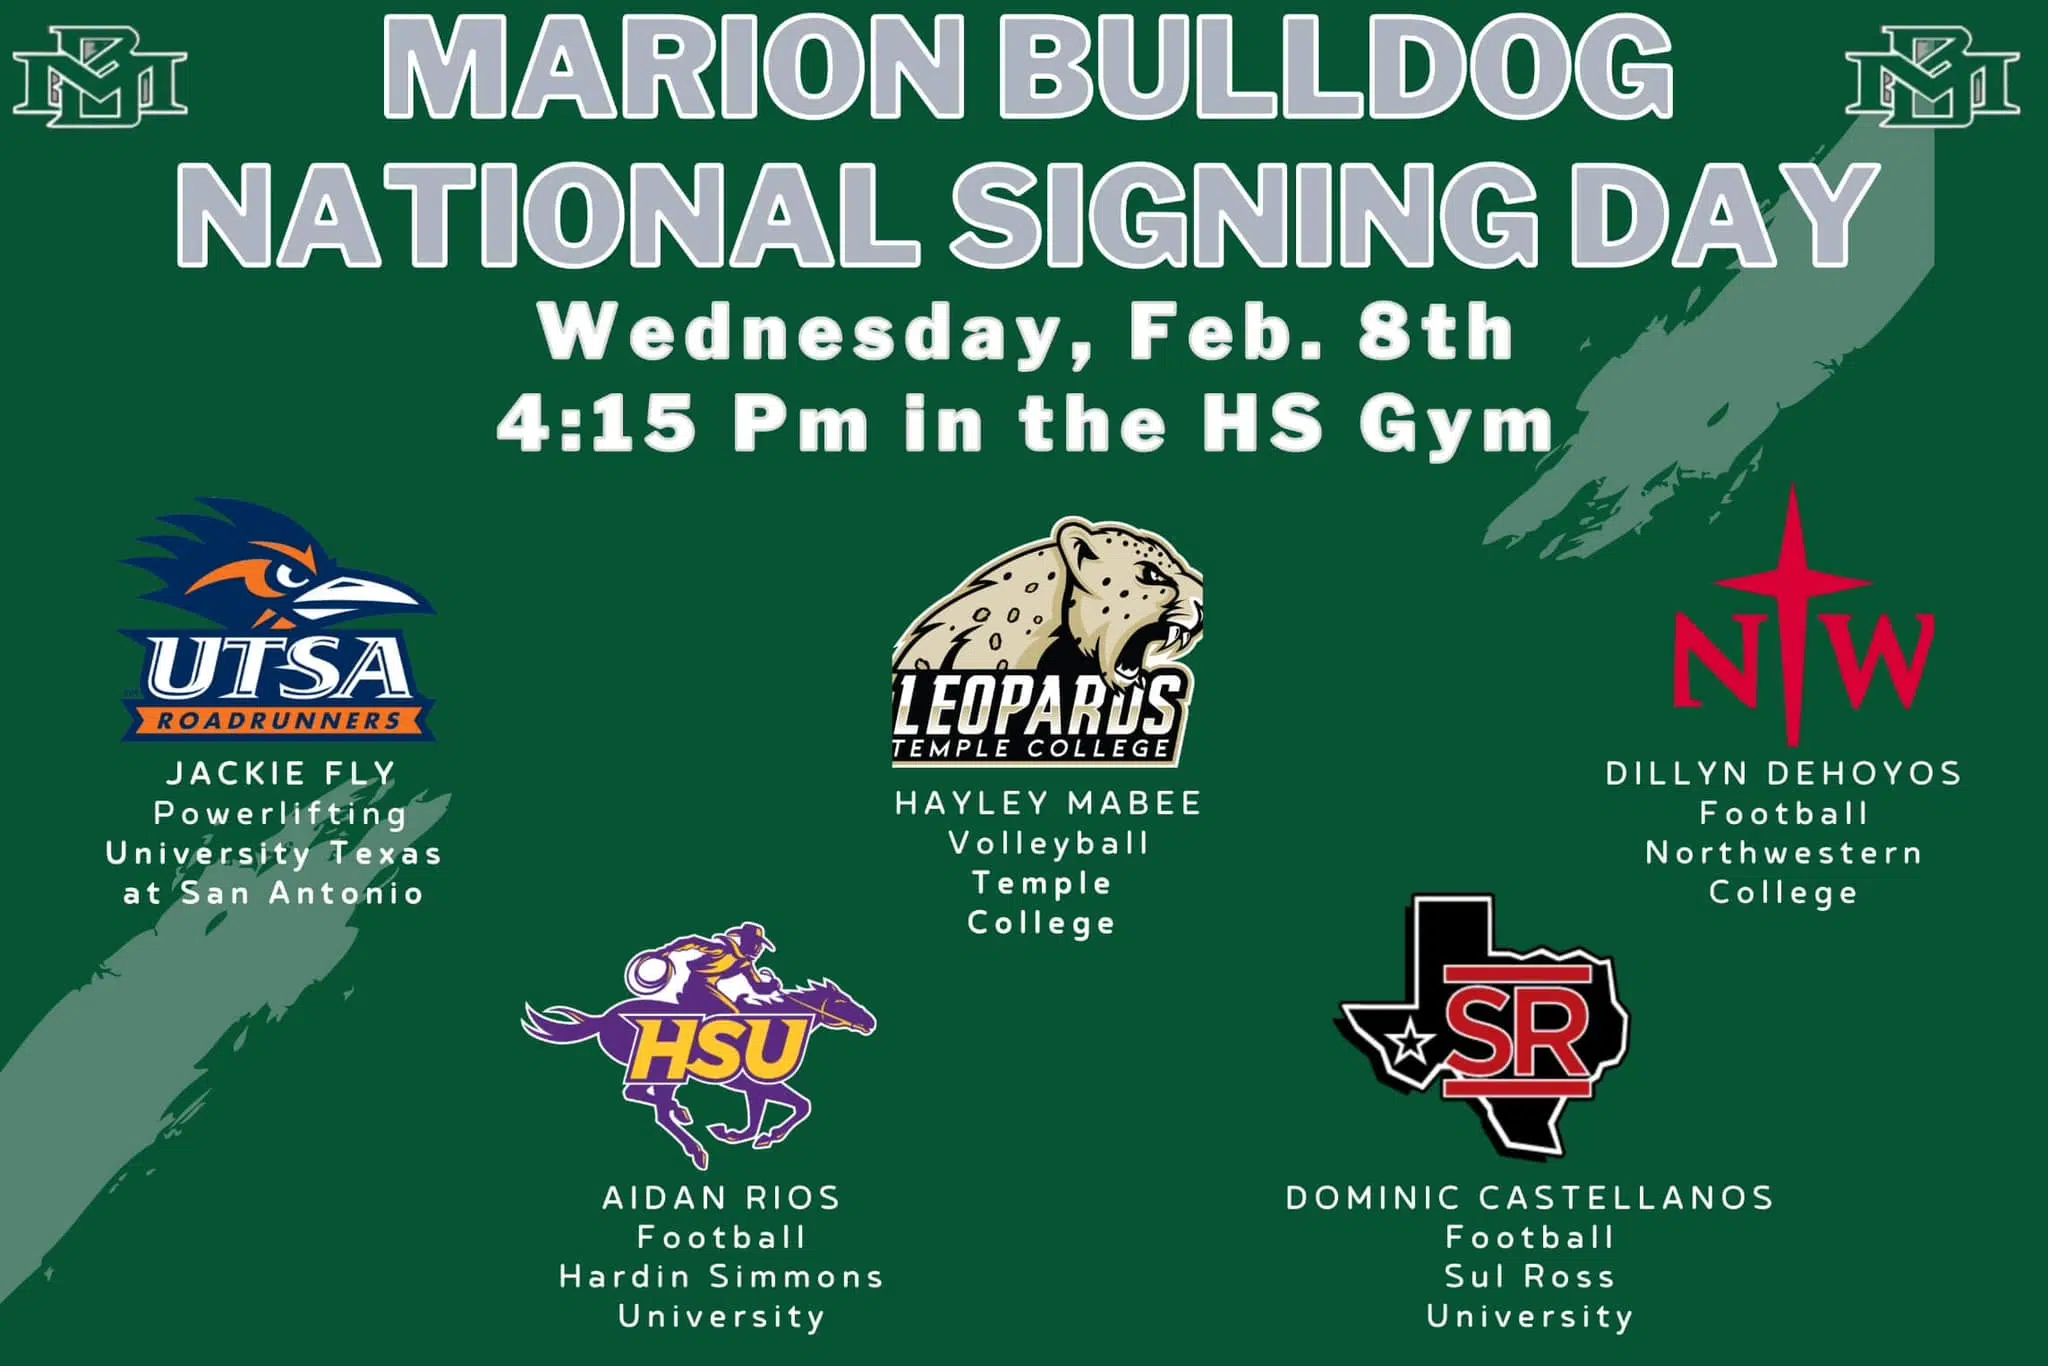 Five Marion Student-Athletes to Sign National Letters of Intent Wednesday